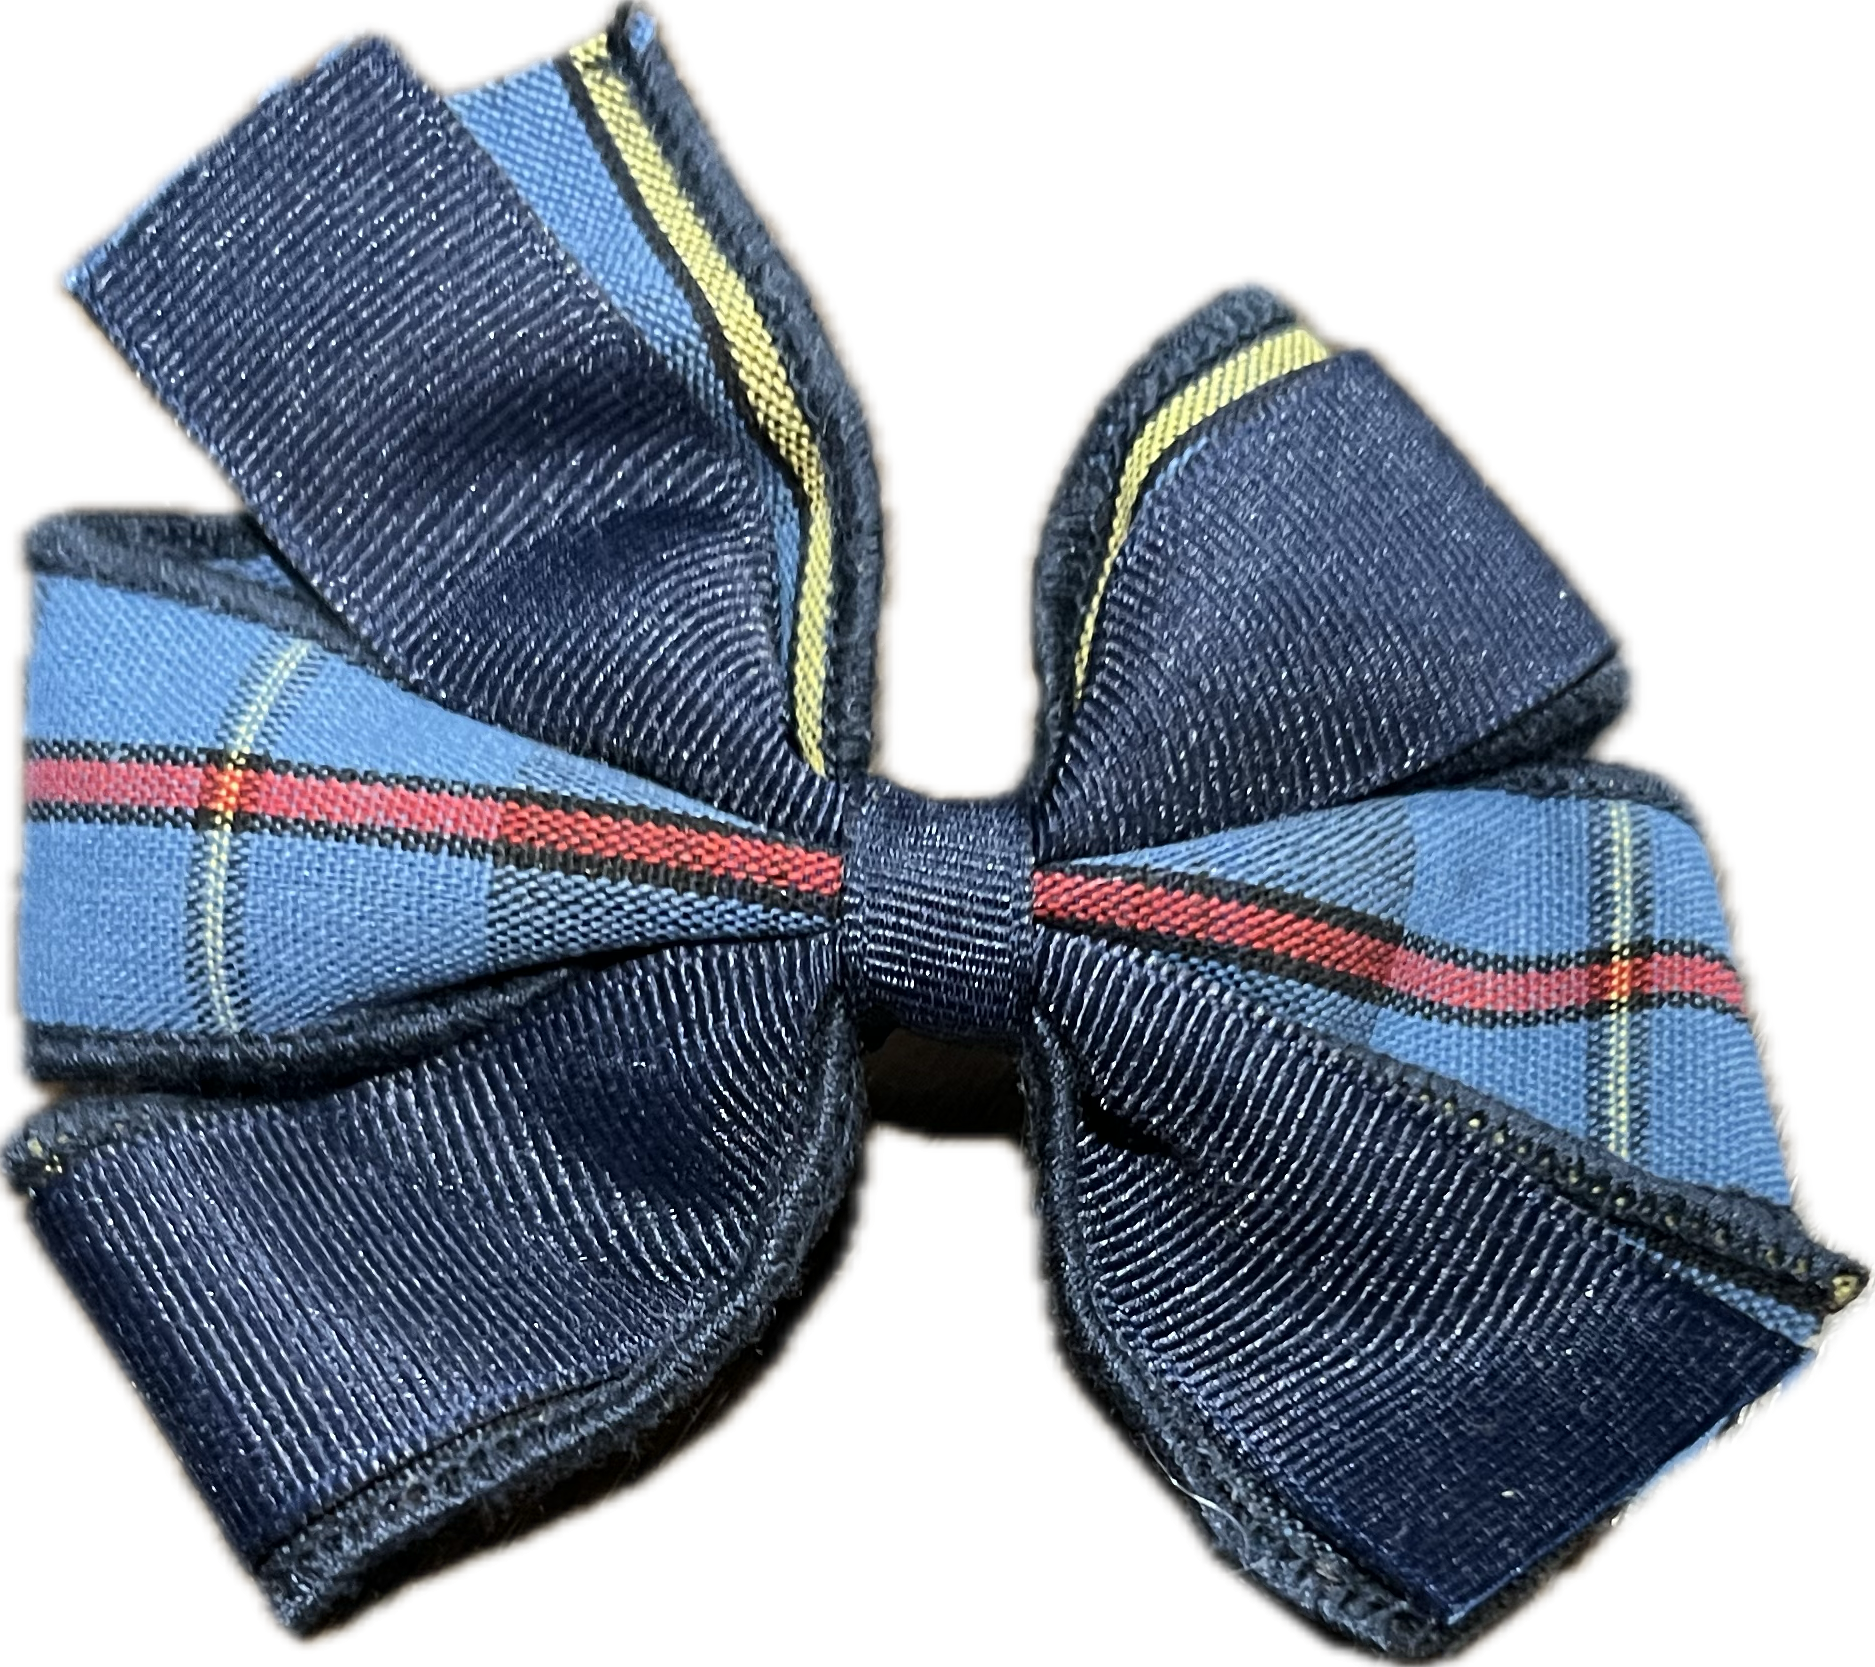 Plaid 41 Bow with Ribbon